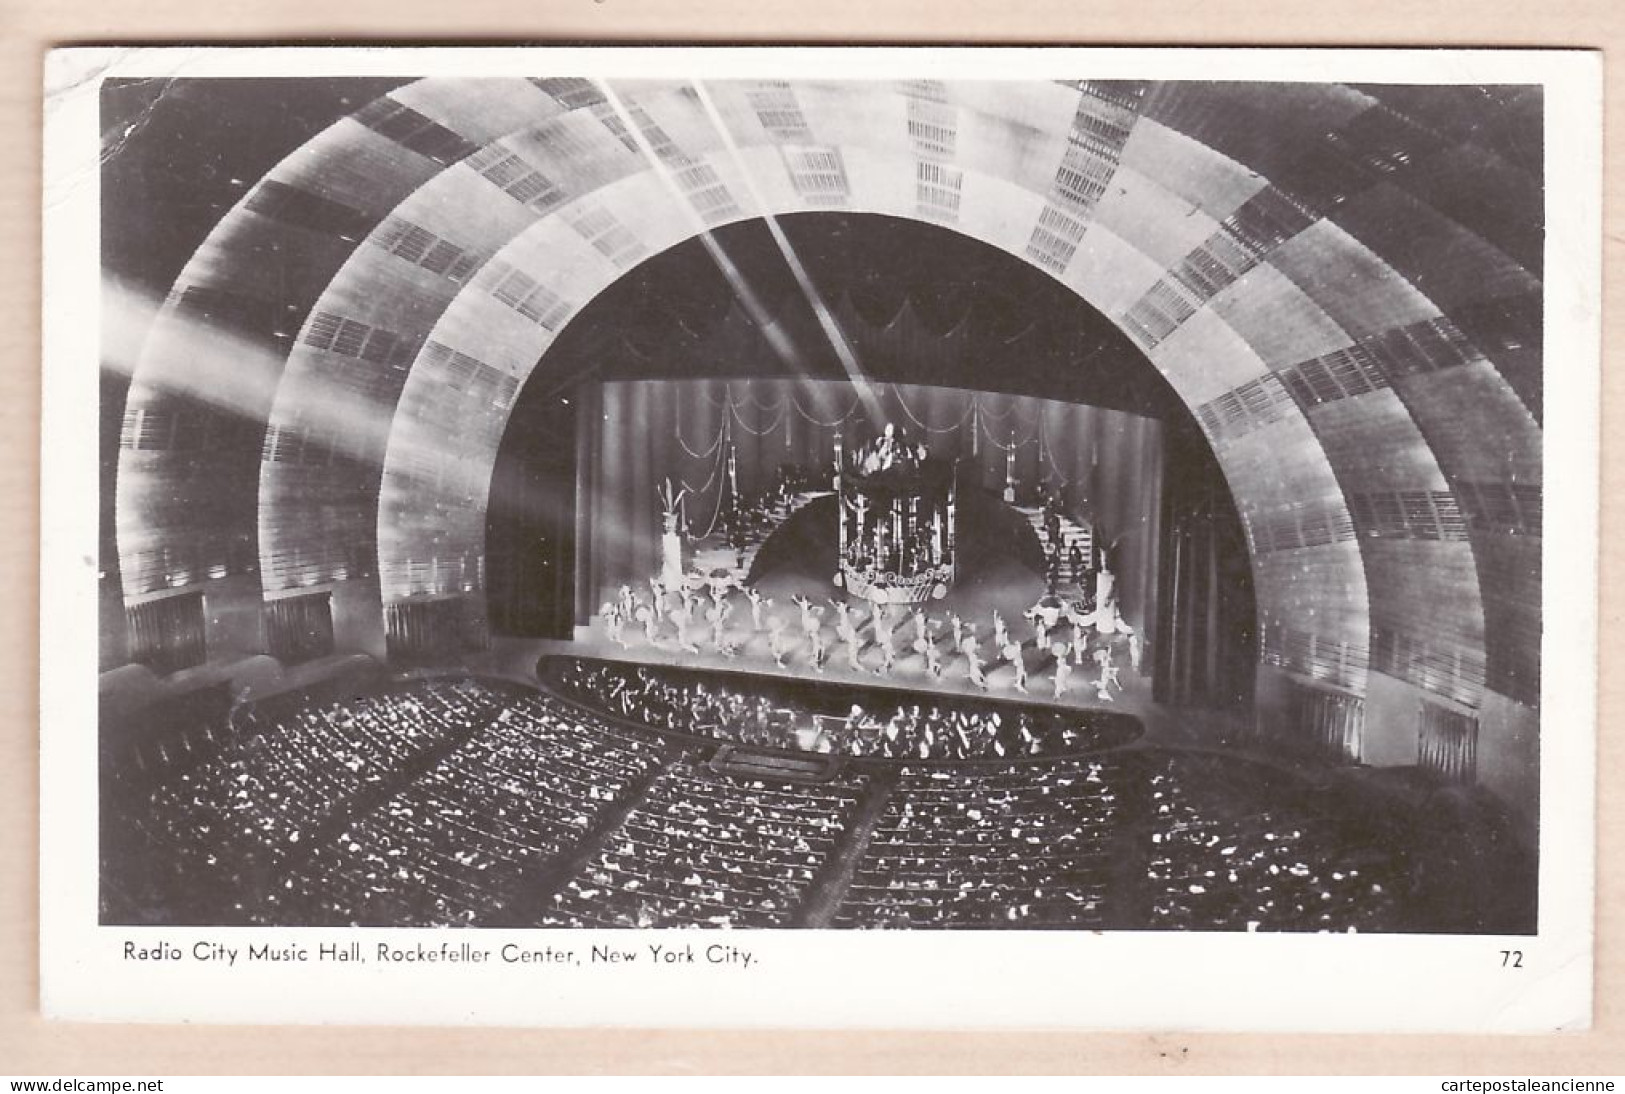 23894 / ⭐ NY Radio City Music Hall ROCKEFELLER CENTER NEW YORK CITY 1947 Publisher MAINZER REAL PHOTO N°72 - Andere Monumente & Gebäude